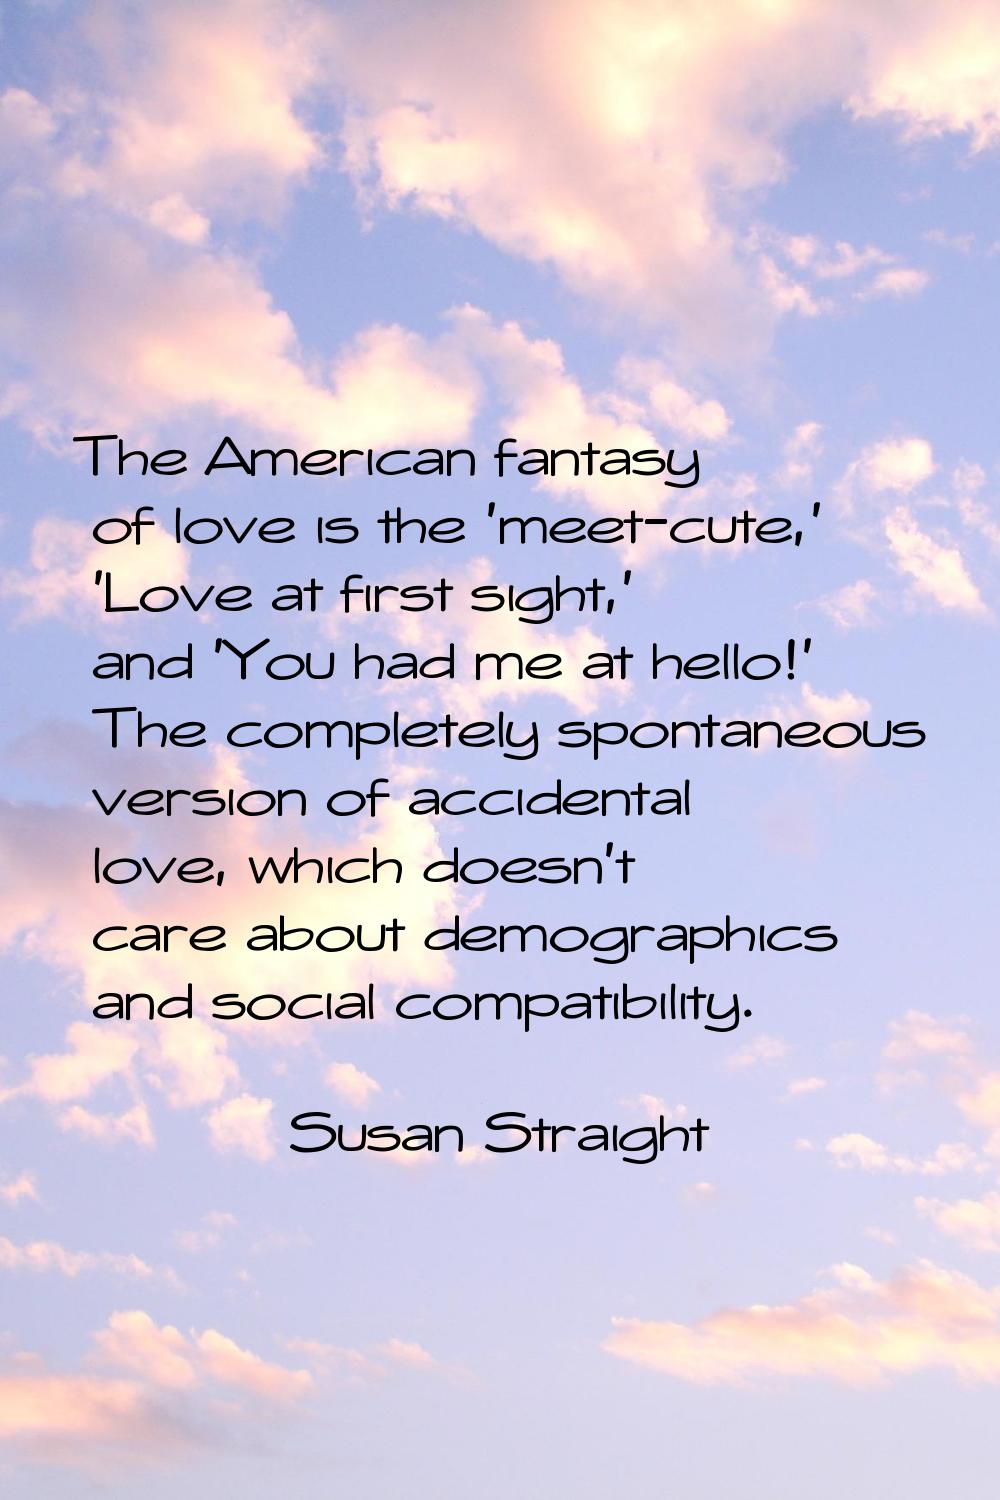 The American fantasy of love is the 'meet-cute,' 'Love at first sight,' and 'You had me at hello!' 